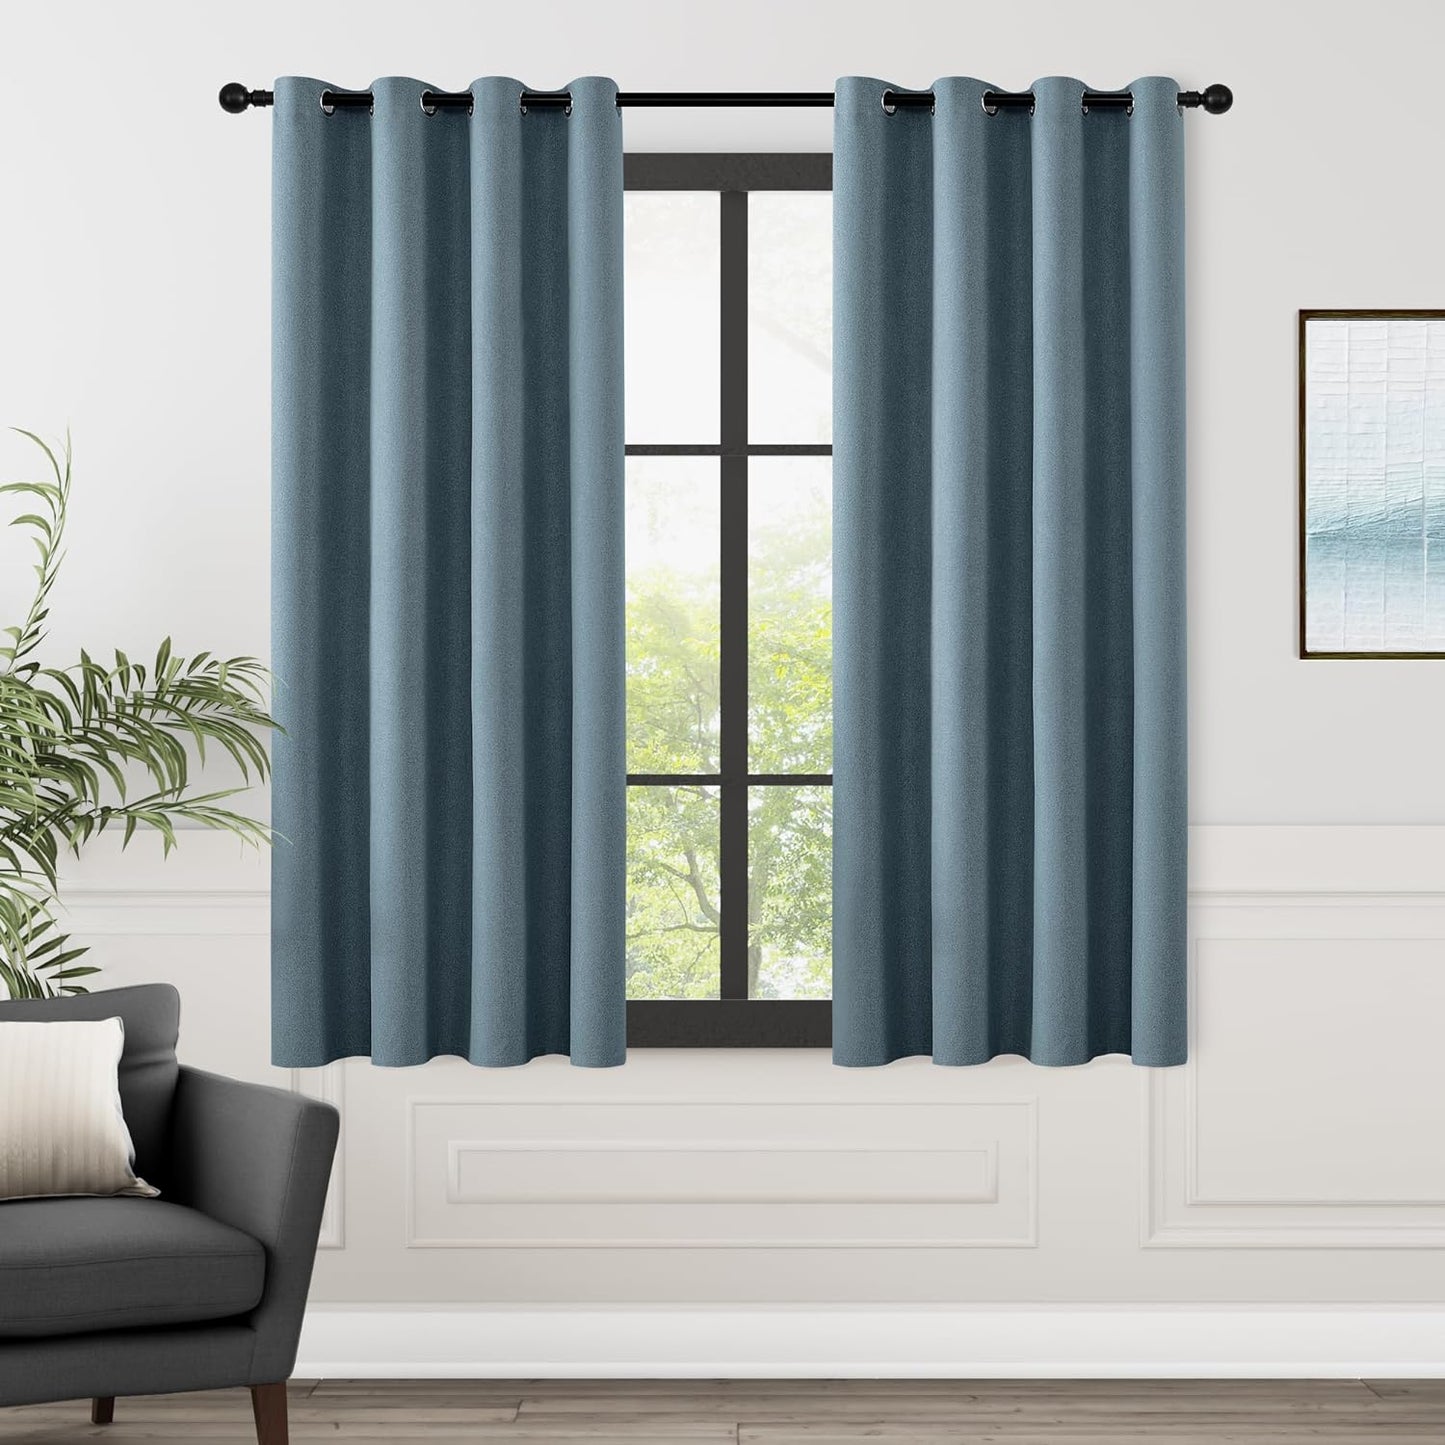 Full Blackout Curtains 84 Inches Long for Bedroom, Neutral Flax Linen Black Out Drapes, 2 Panels Grommet Room Darkening Curtains 84 Inch Length with Backing for Living Room Light Beige 52X84  ChrisDowa Blue 52W X 63L 